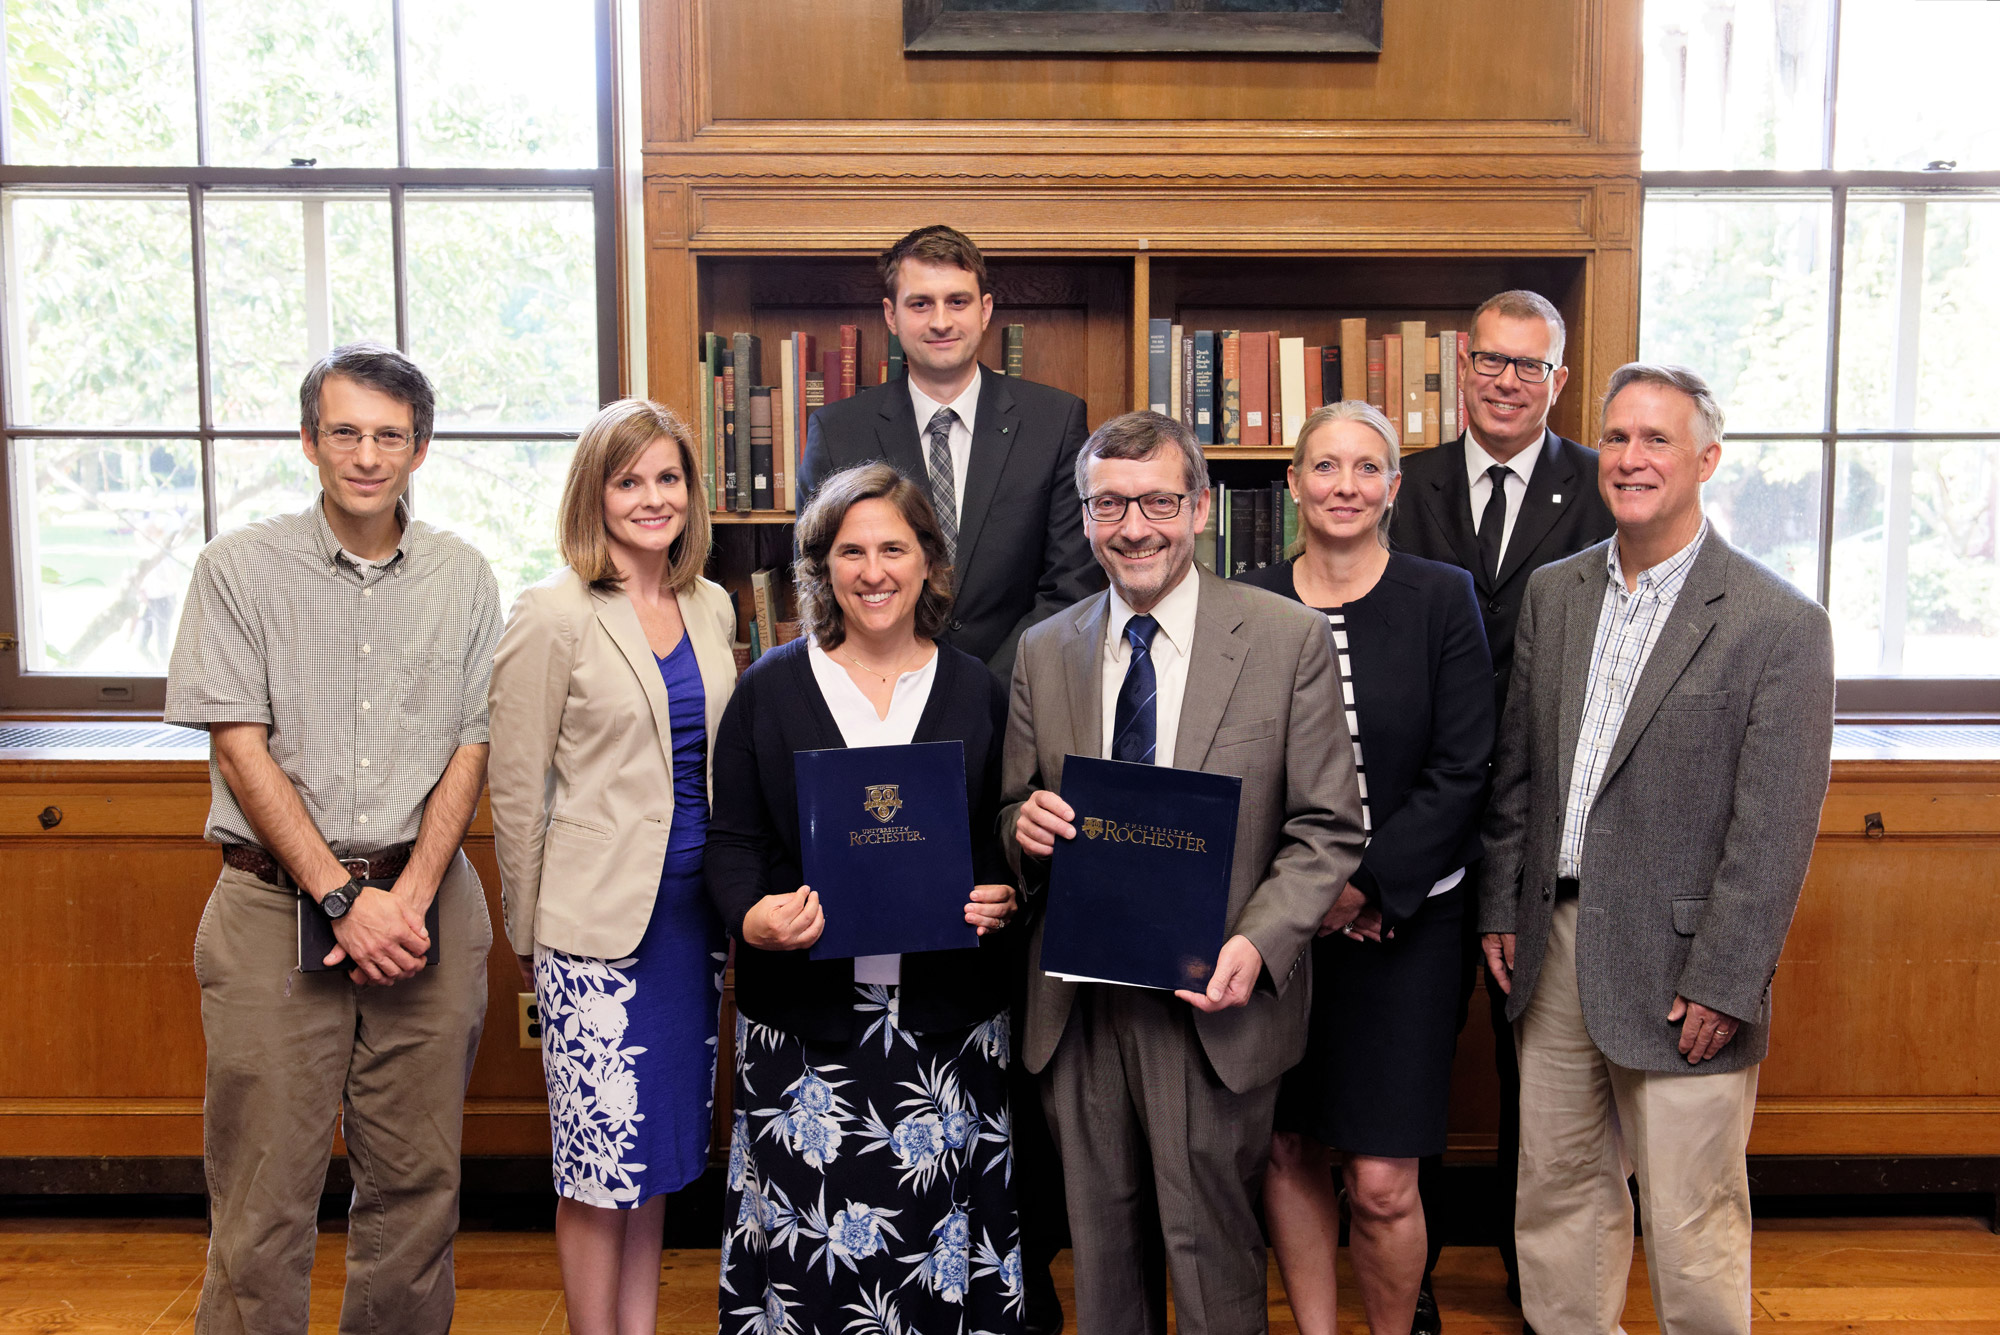 The University of Rochester and Friedrich Schiller University Jen sign a Memorandum of Understanding for the ERASMUS program. The event was held in the Welles-Brown Room of Rush Rhees Library on the University of Rochester's River Campus, Rochester, NY, Monday, September 12, 2016. In the front row from left to right: Andrew Berger, Jane Gatewood, Wendi Heinzelman, Walter Rosenthal, Claudia Hillinger, and Tom Brown. In the rear from left to right: Kevin Füchsel and Andreas Tünnermann. 